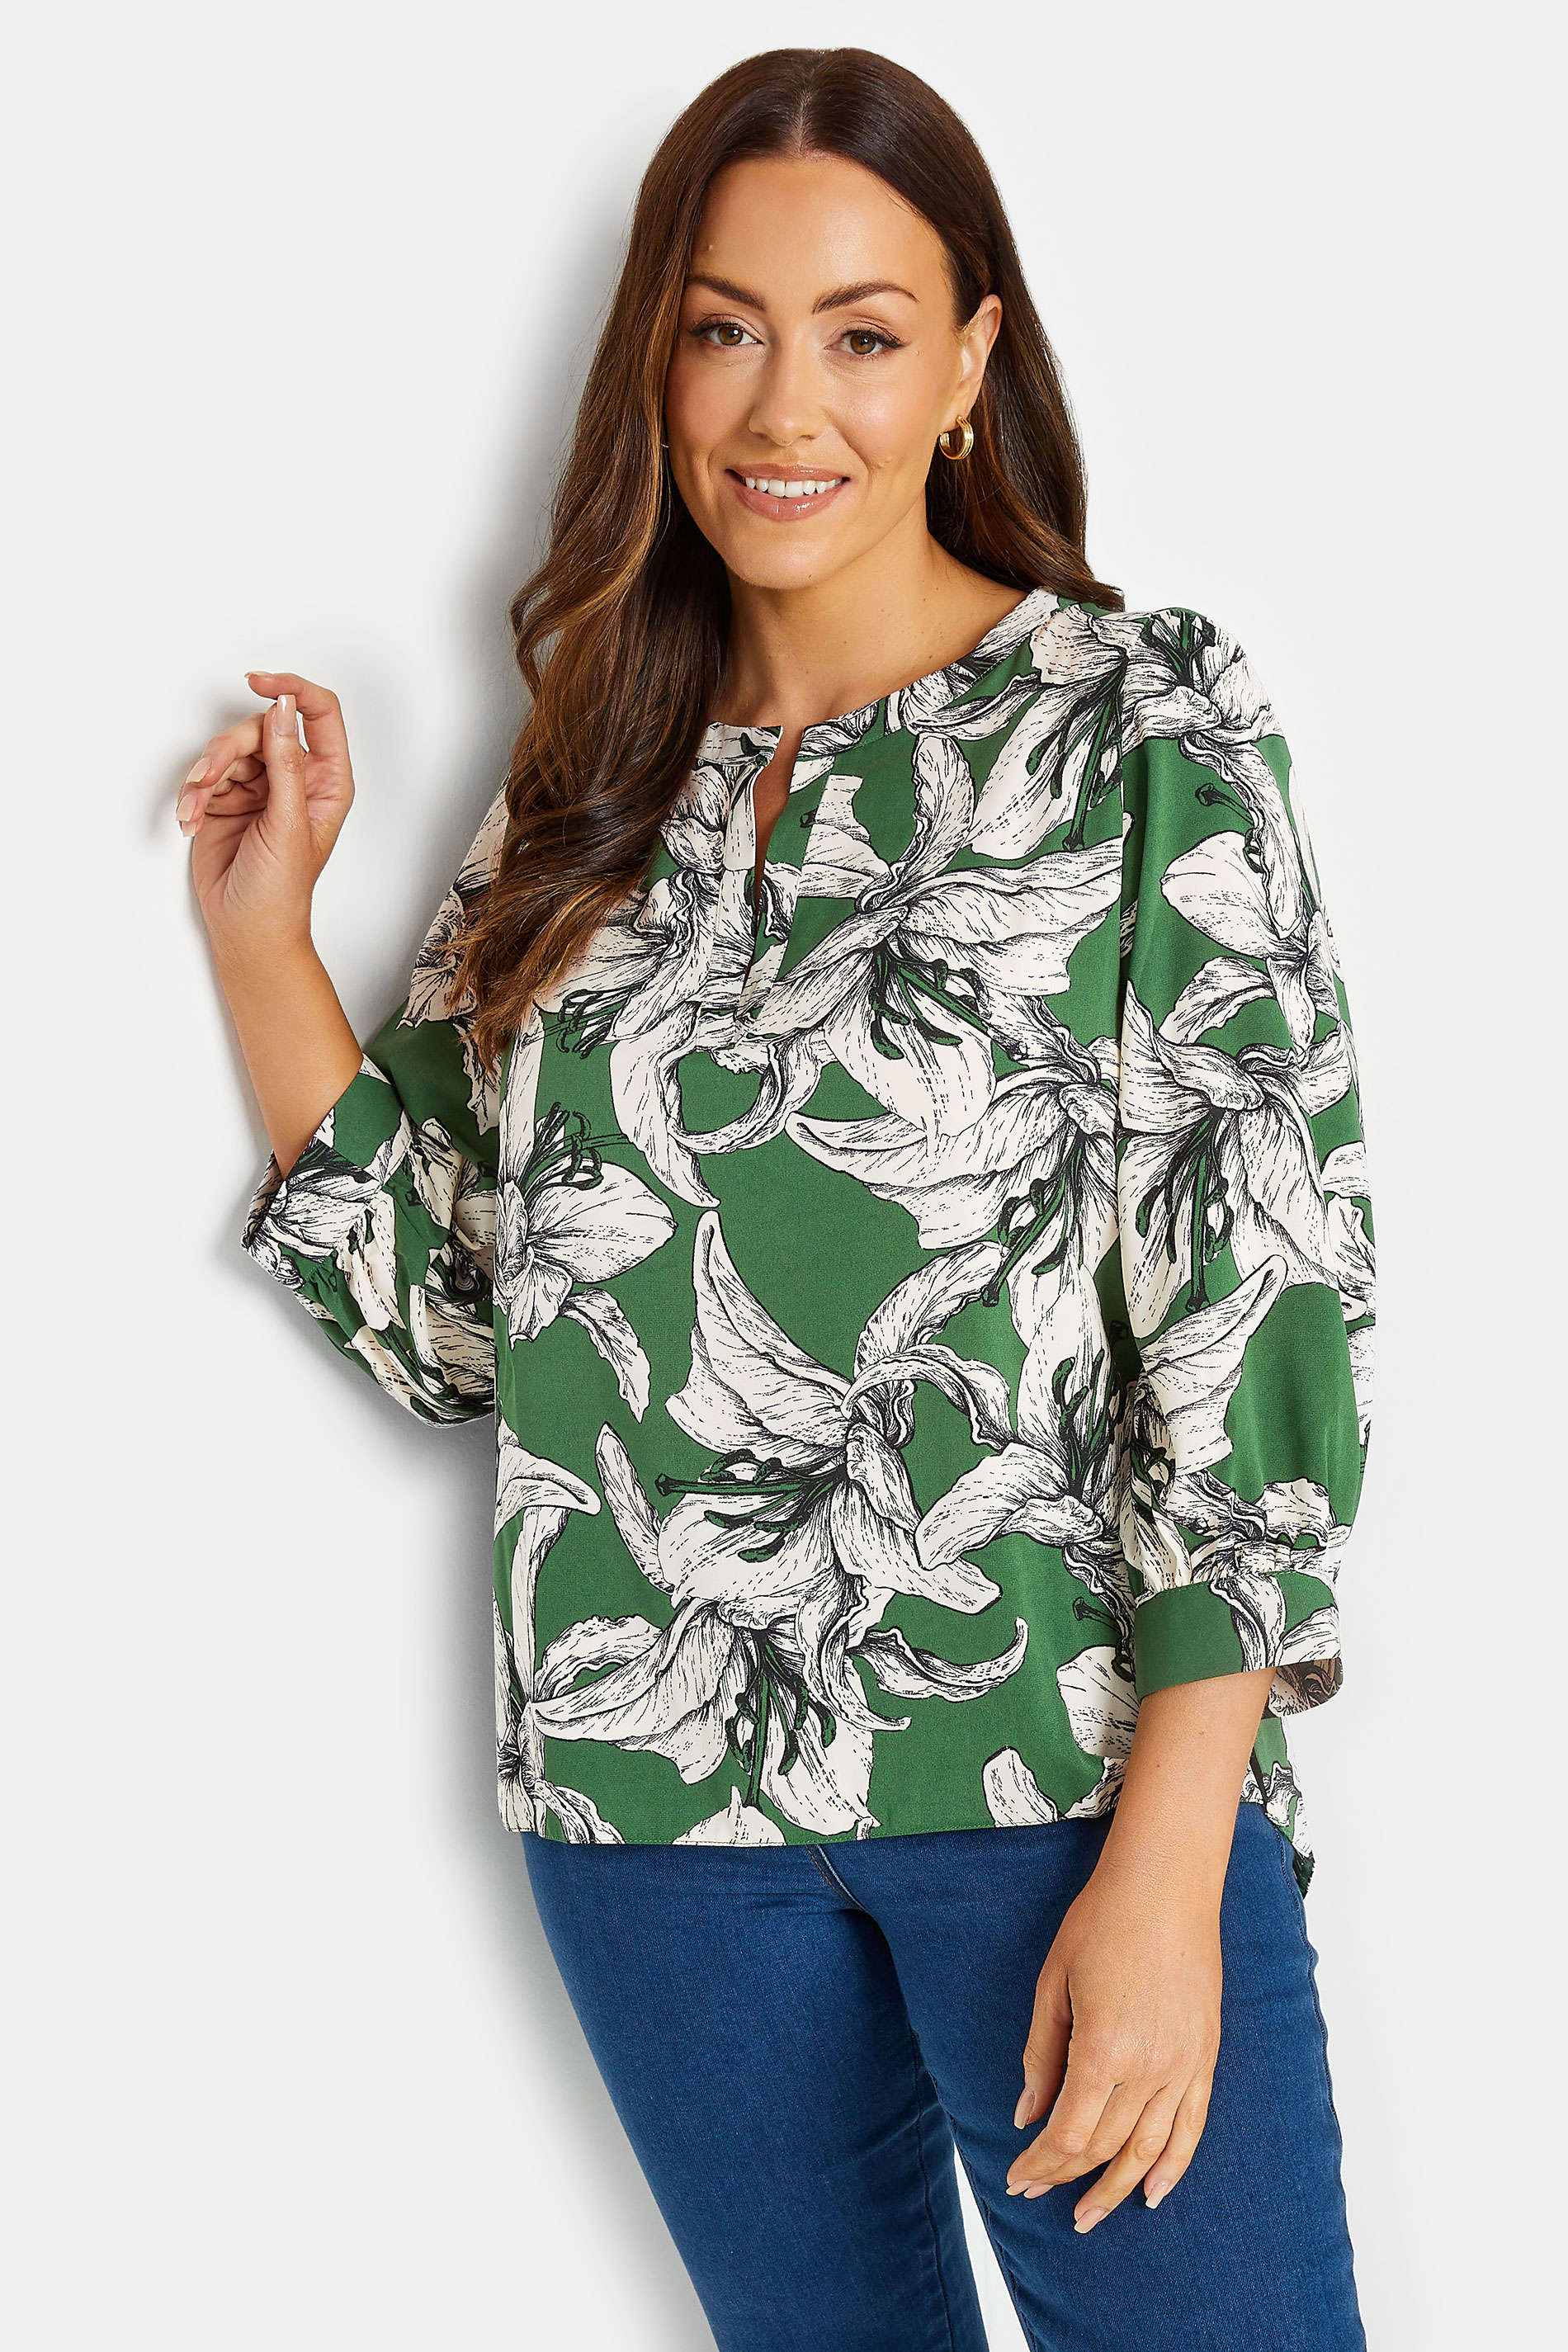 M&Co Green Floral Print 3/4 Sleeve Blouse | M&Co 1